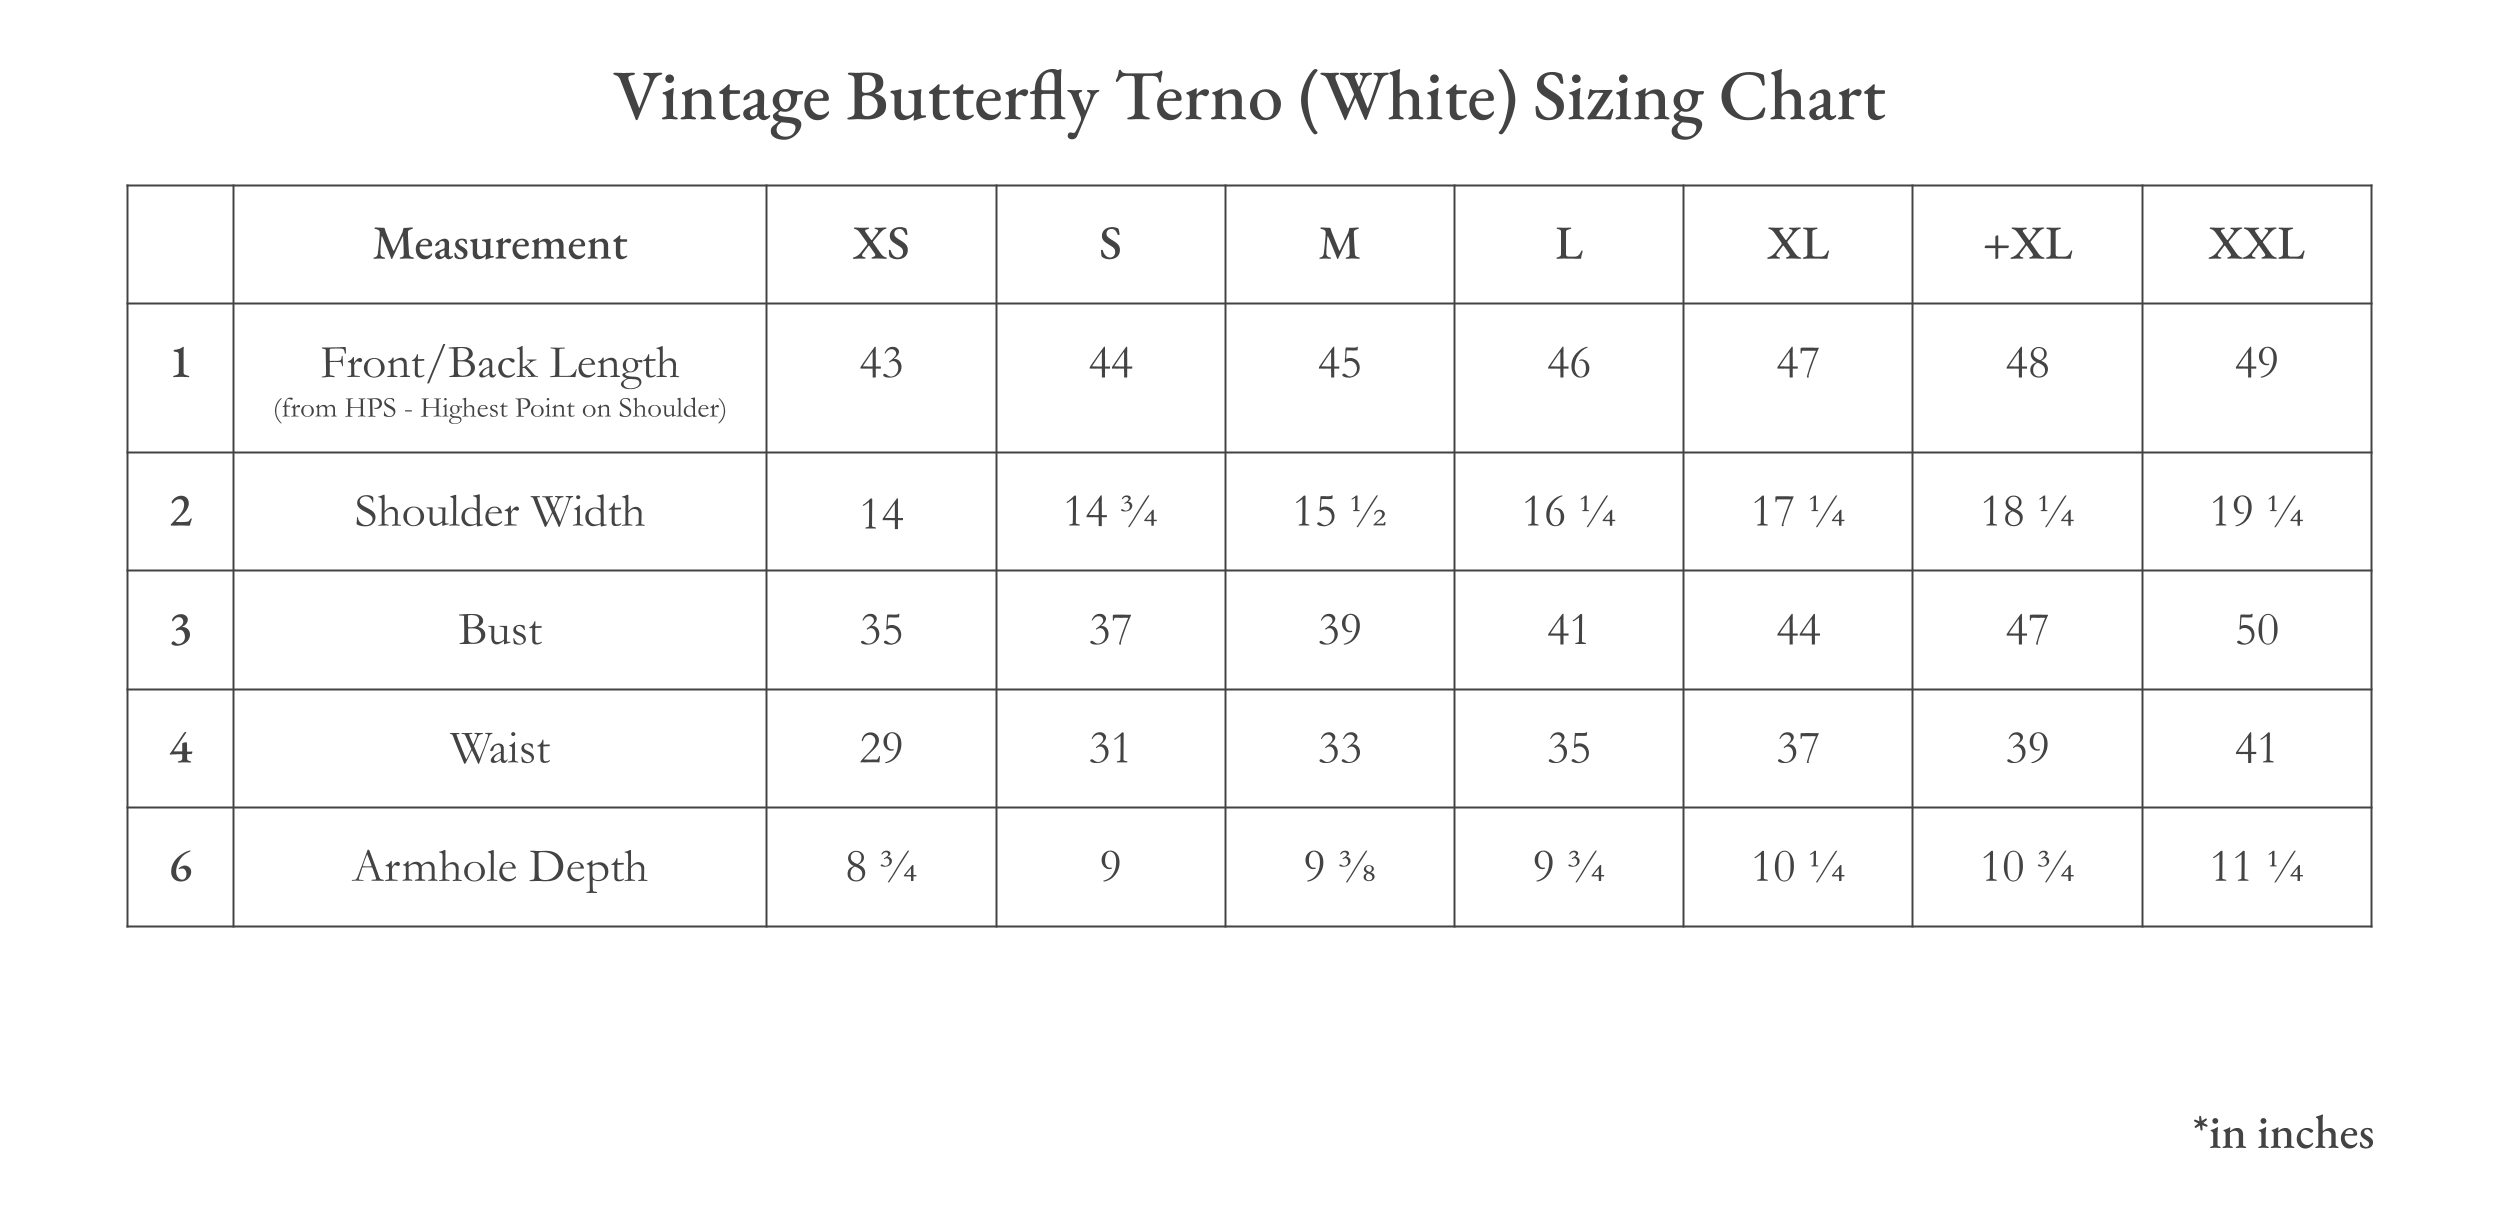 Vinta Vintage Butterfly Terno (White) Size Chart